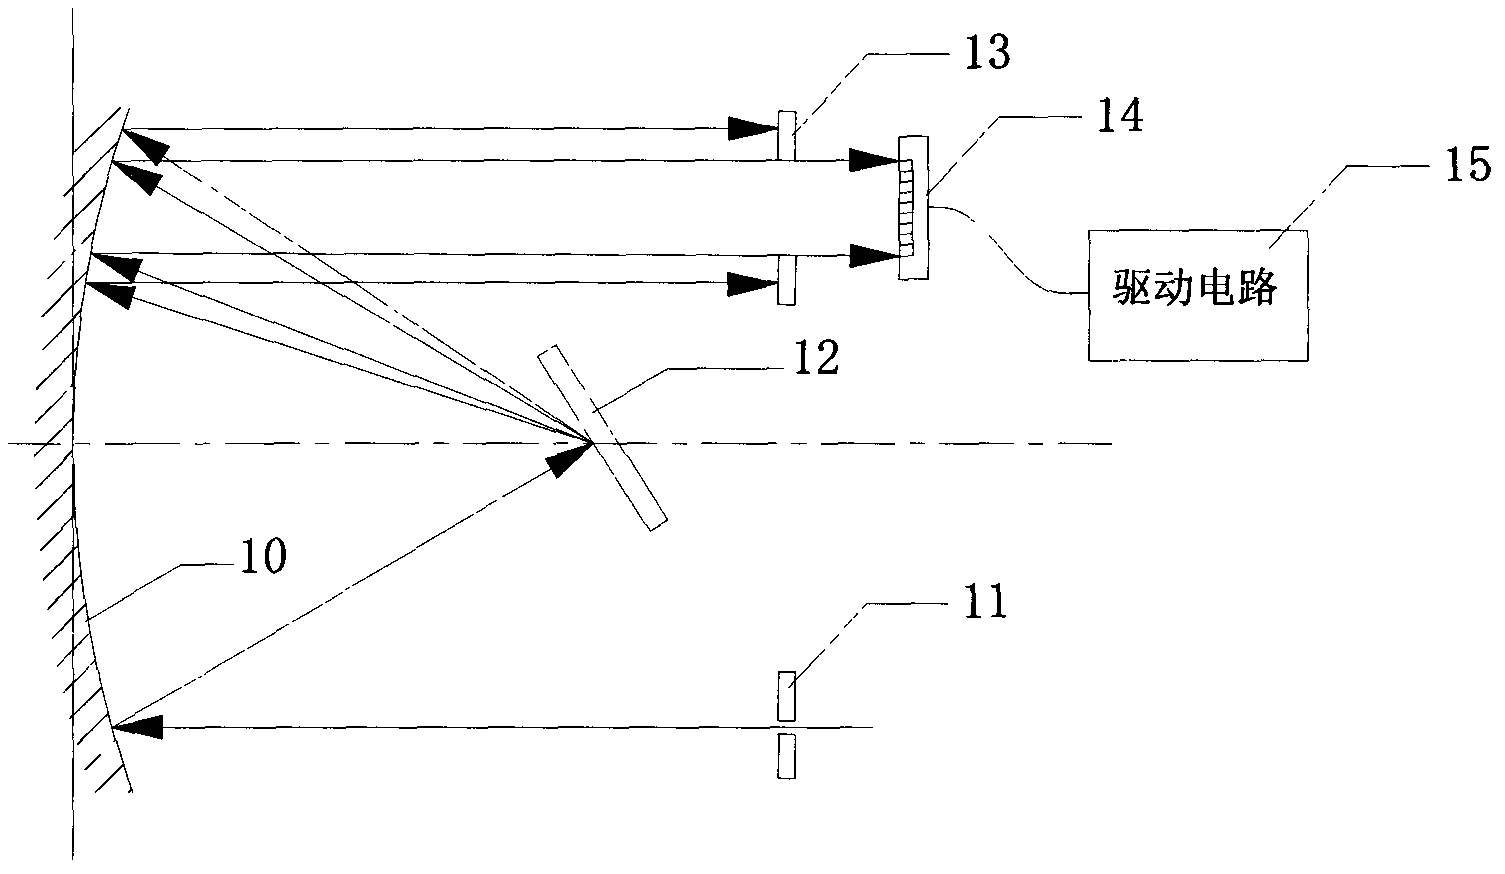 Device for non-contact measurement of junction temperature of white LED by use of peak wavelength displacement method